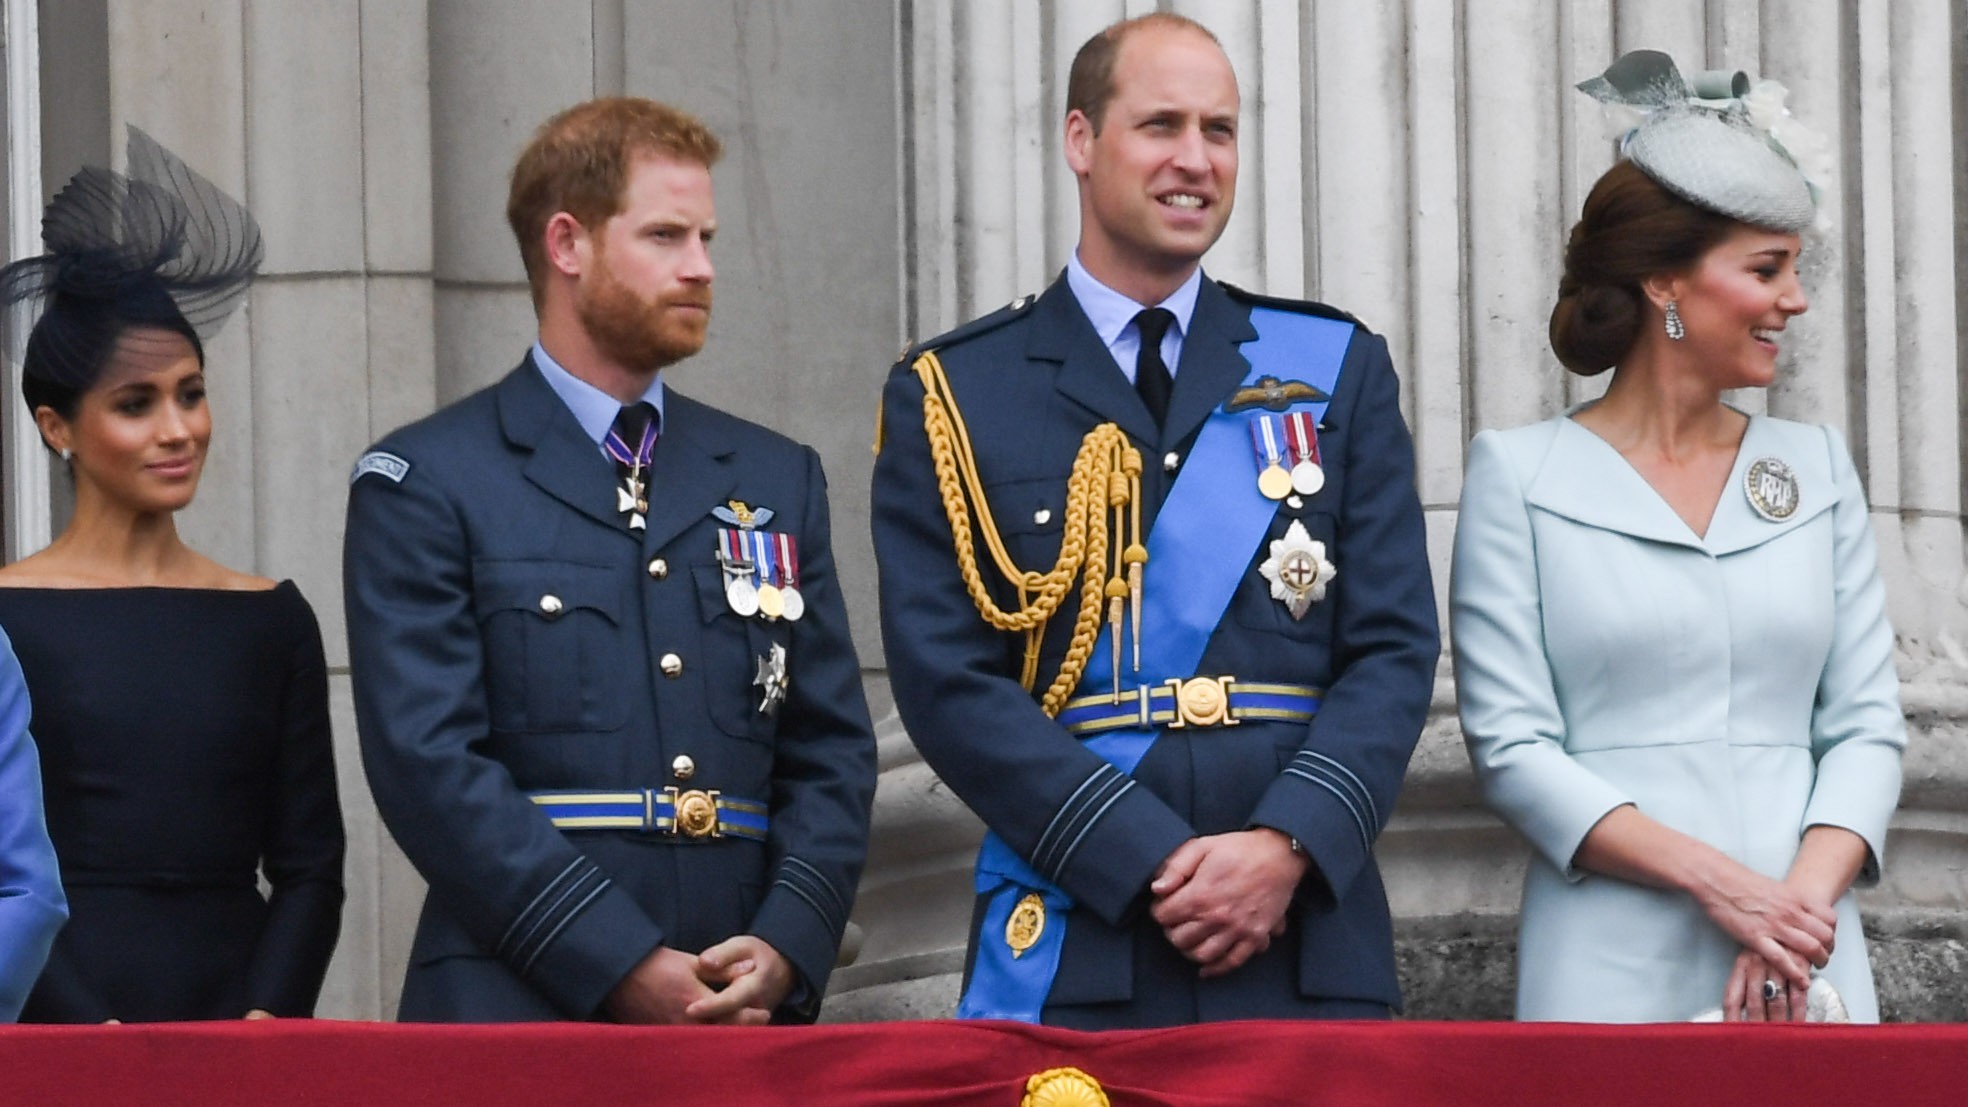 It Reportedly Wasn’t the Queen Who Pushed for Prince Harry and Meghan Markle’s Balcony Exclusion